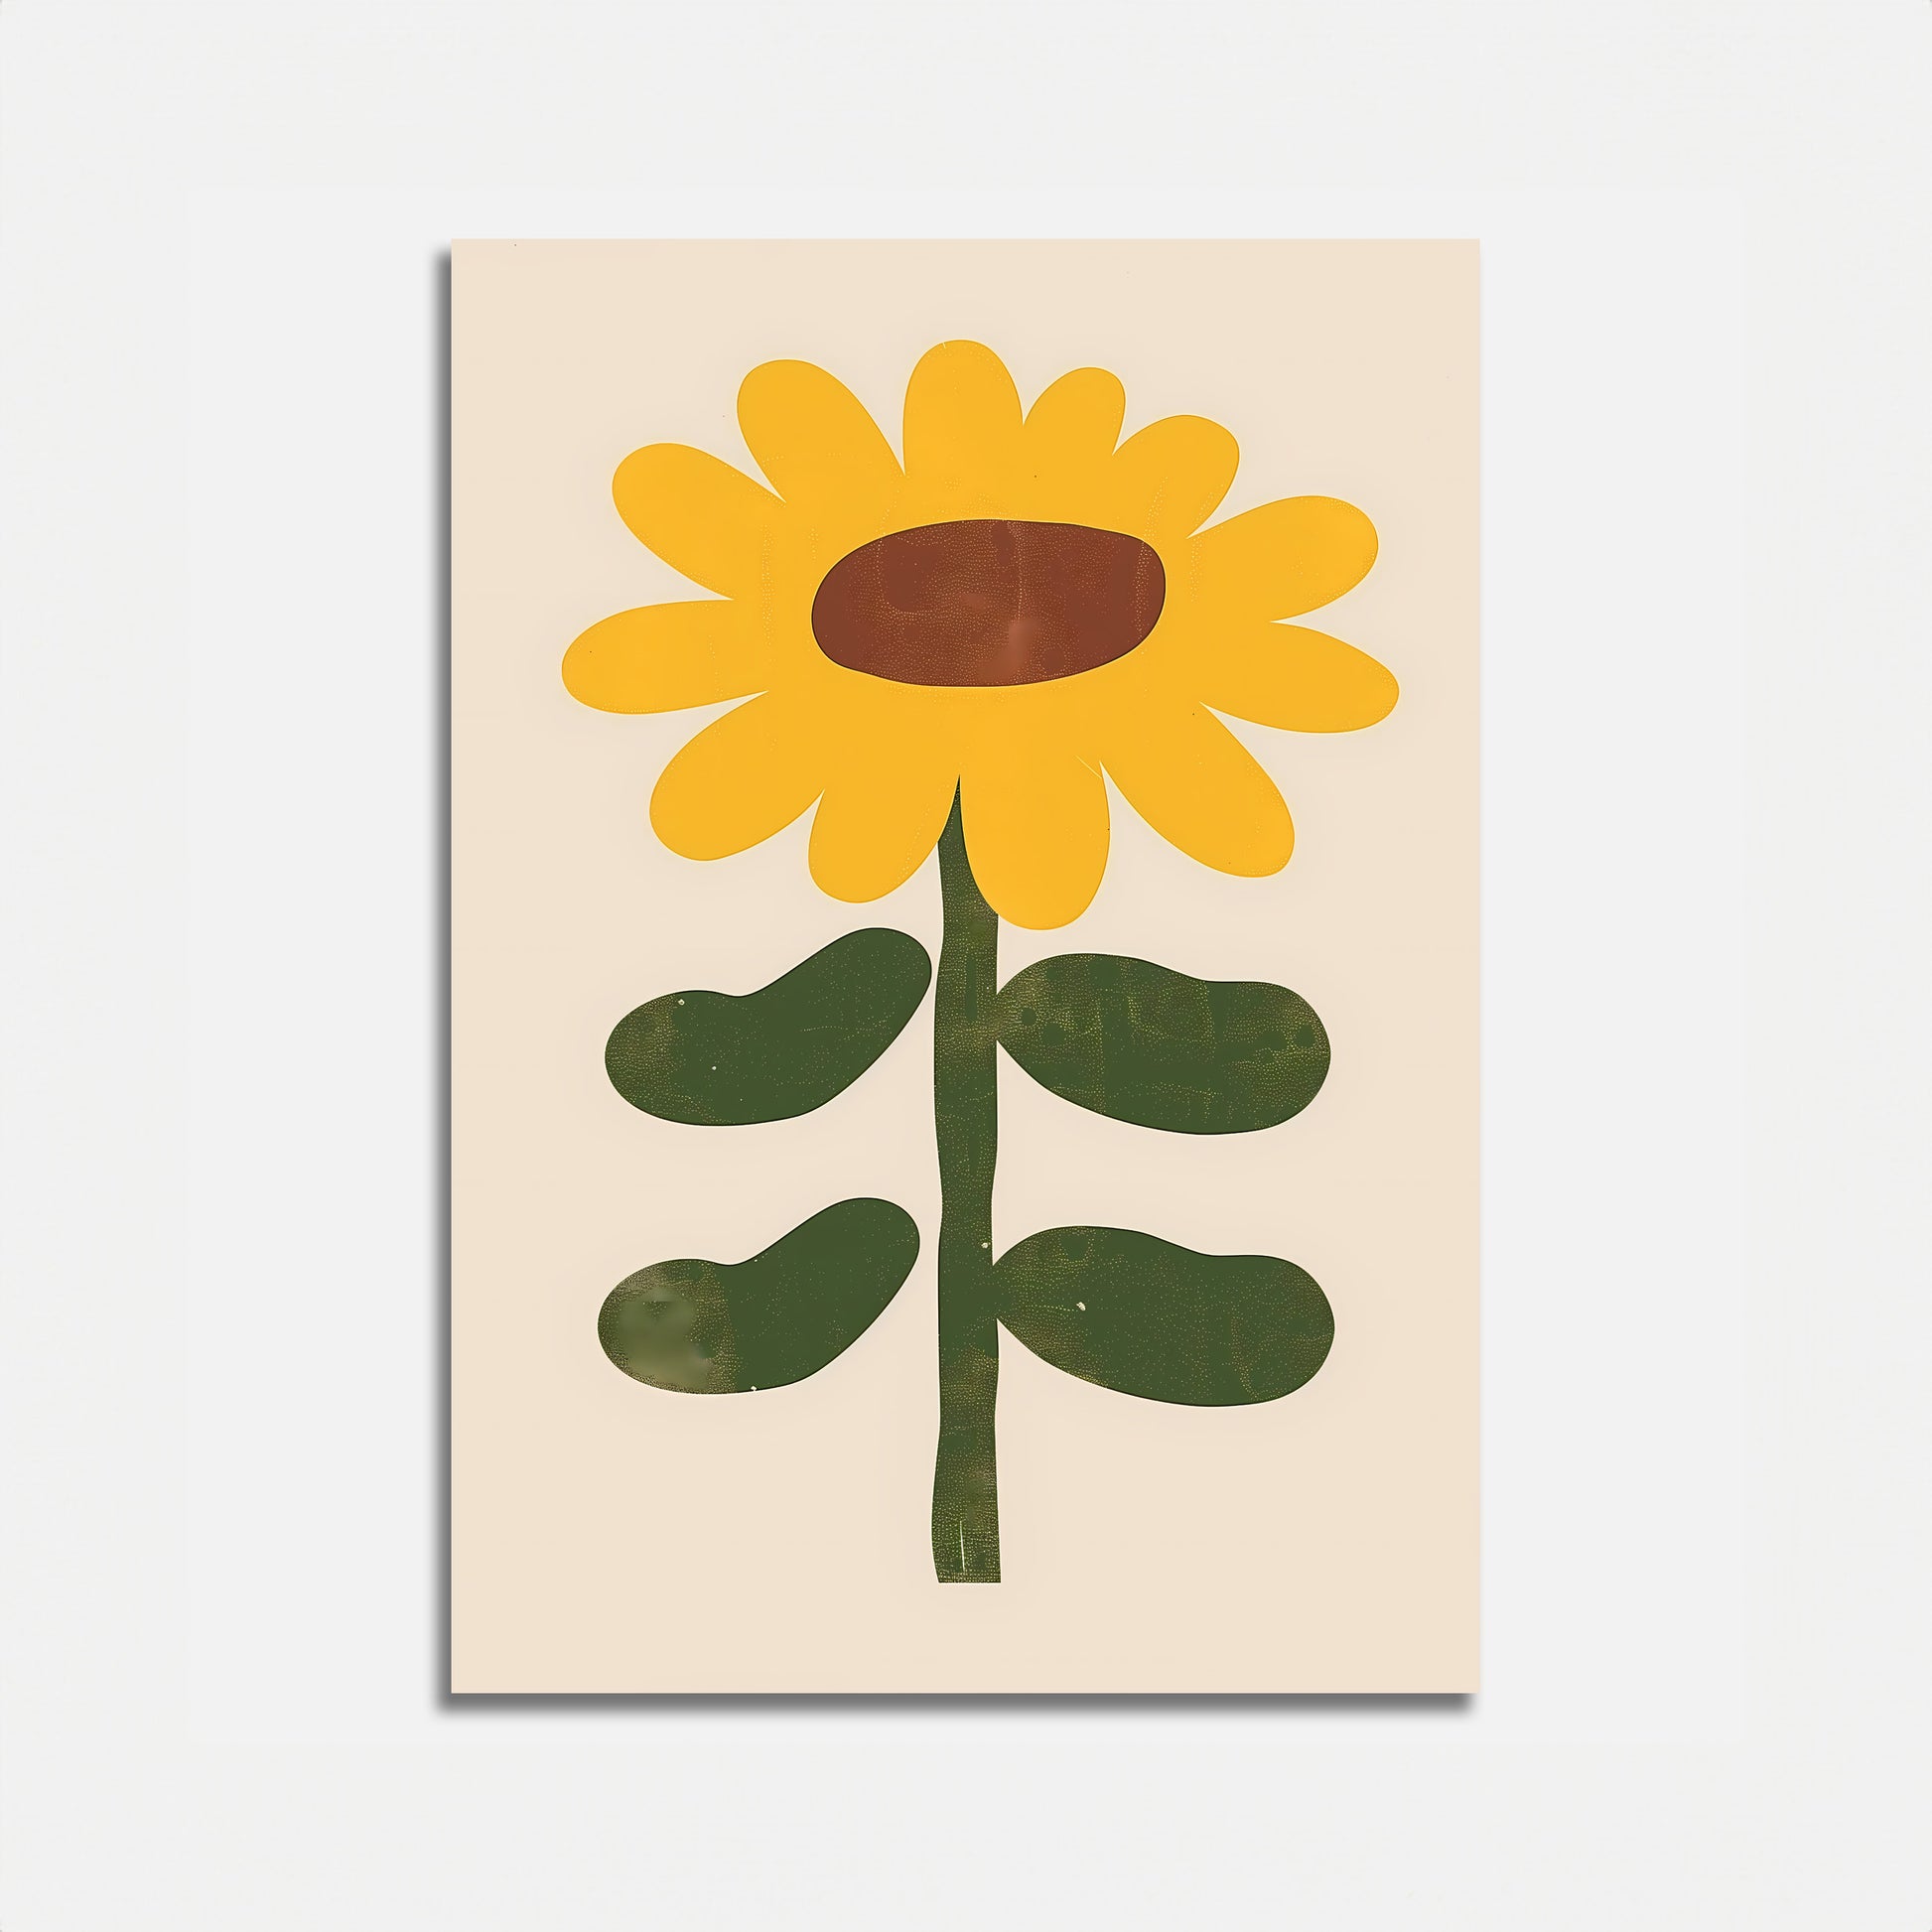 A stylized artwork of a yellow sunflower with a brown center on a light background.